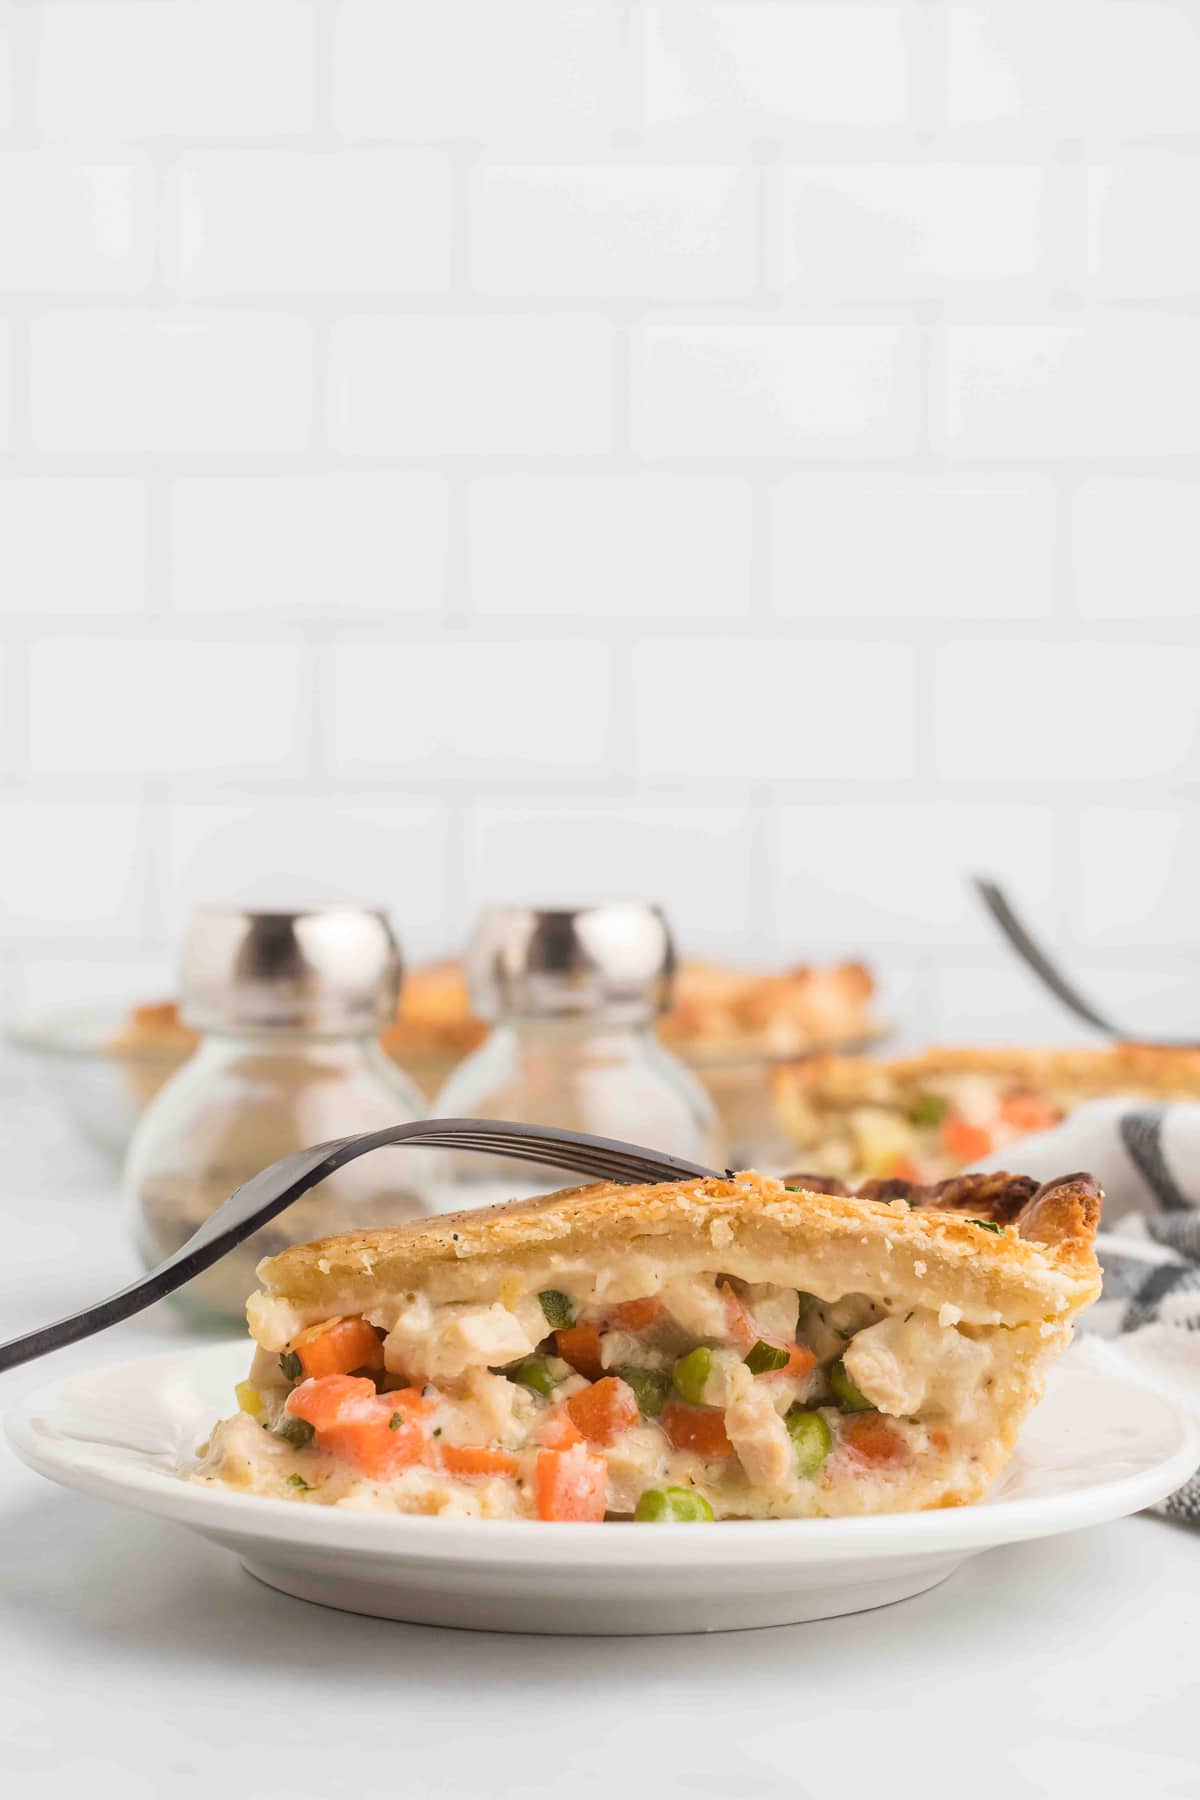 A slice of chicken pot pie on a white plate